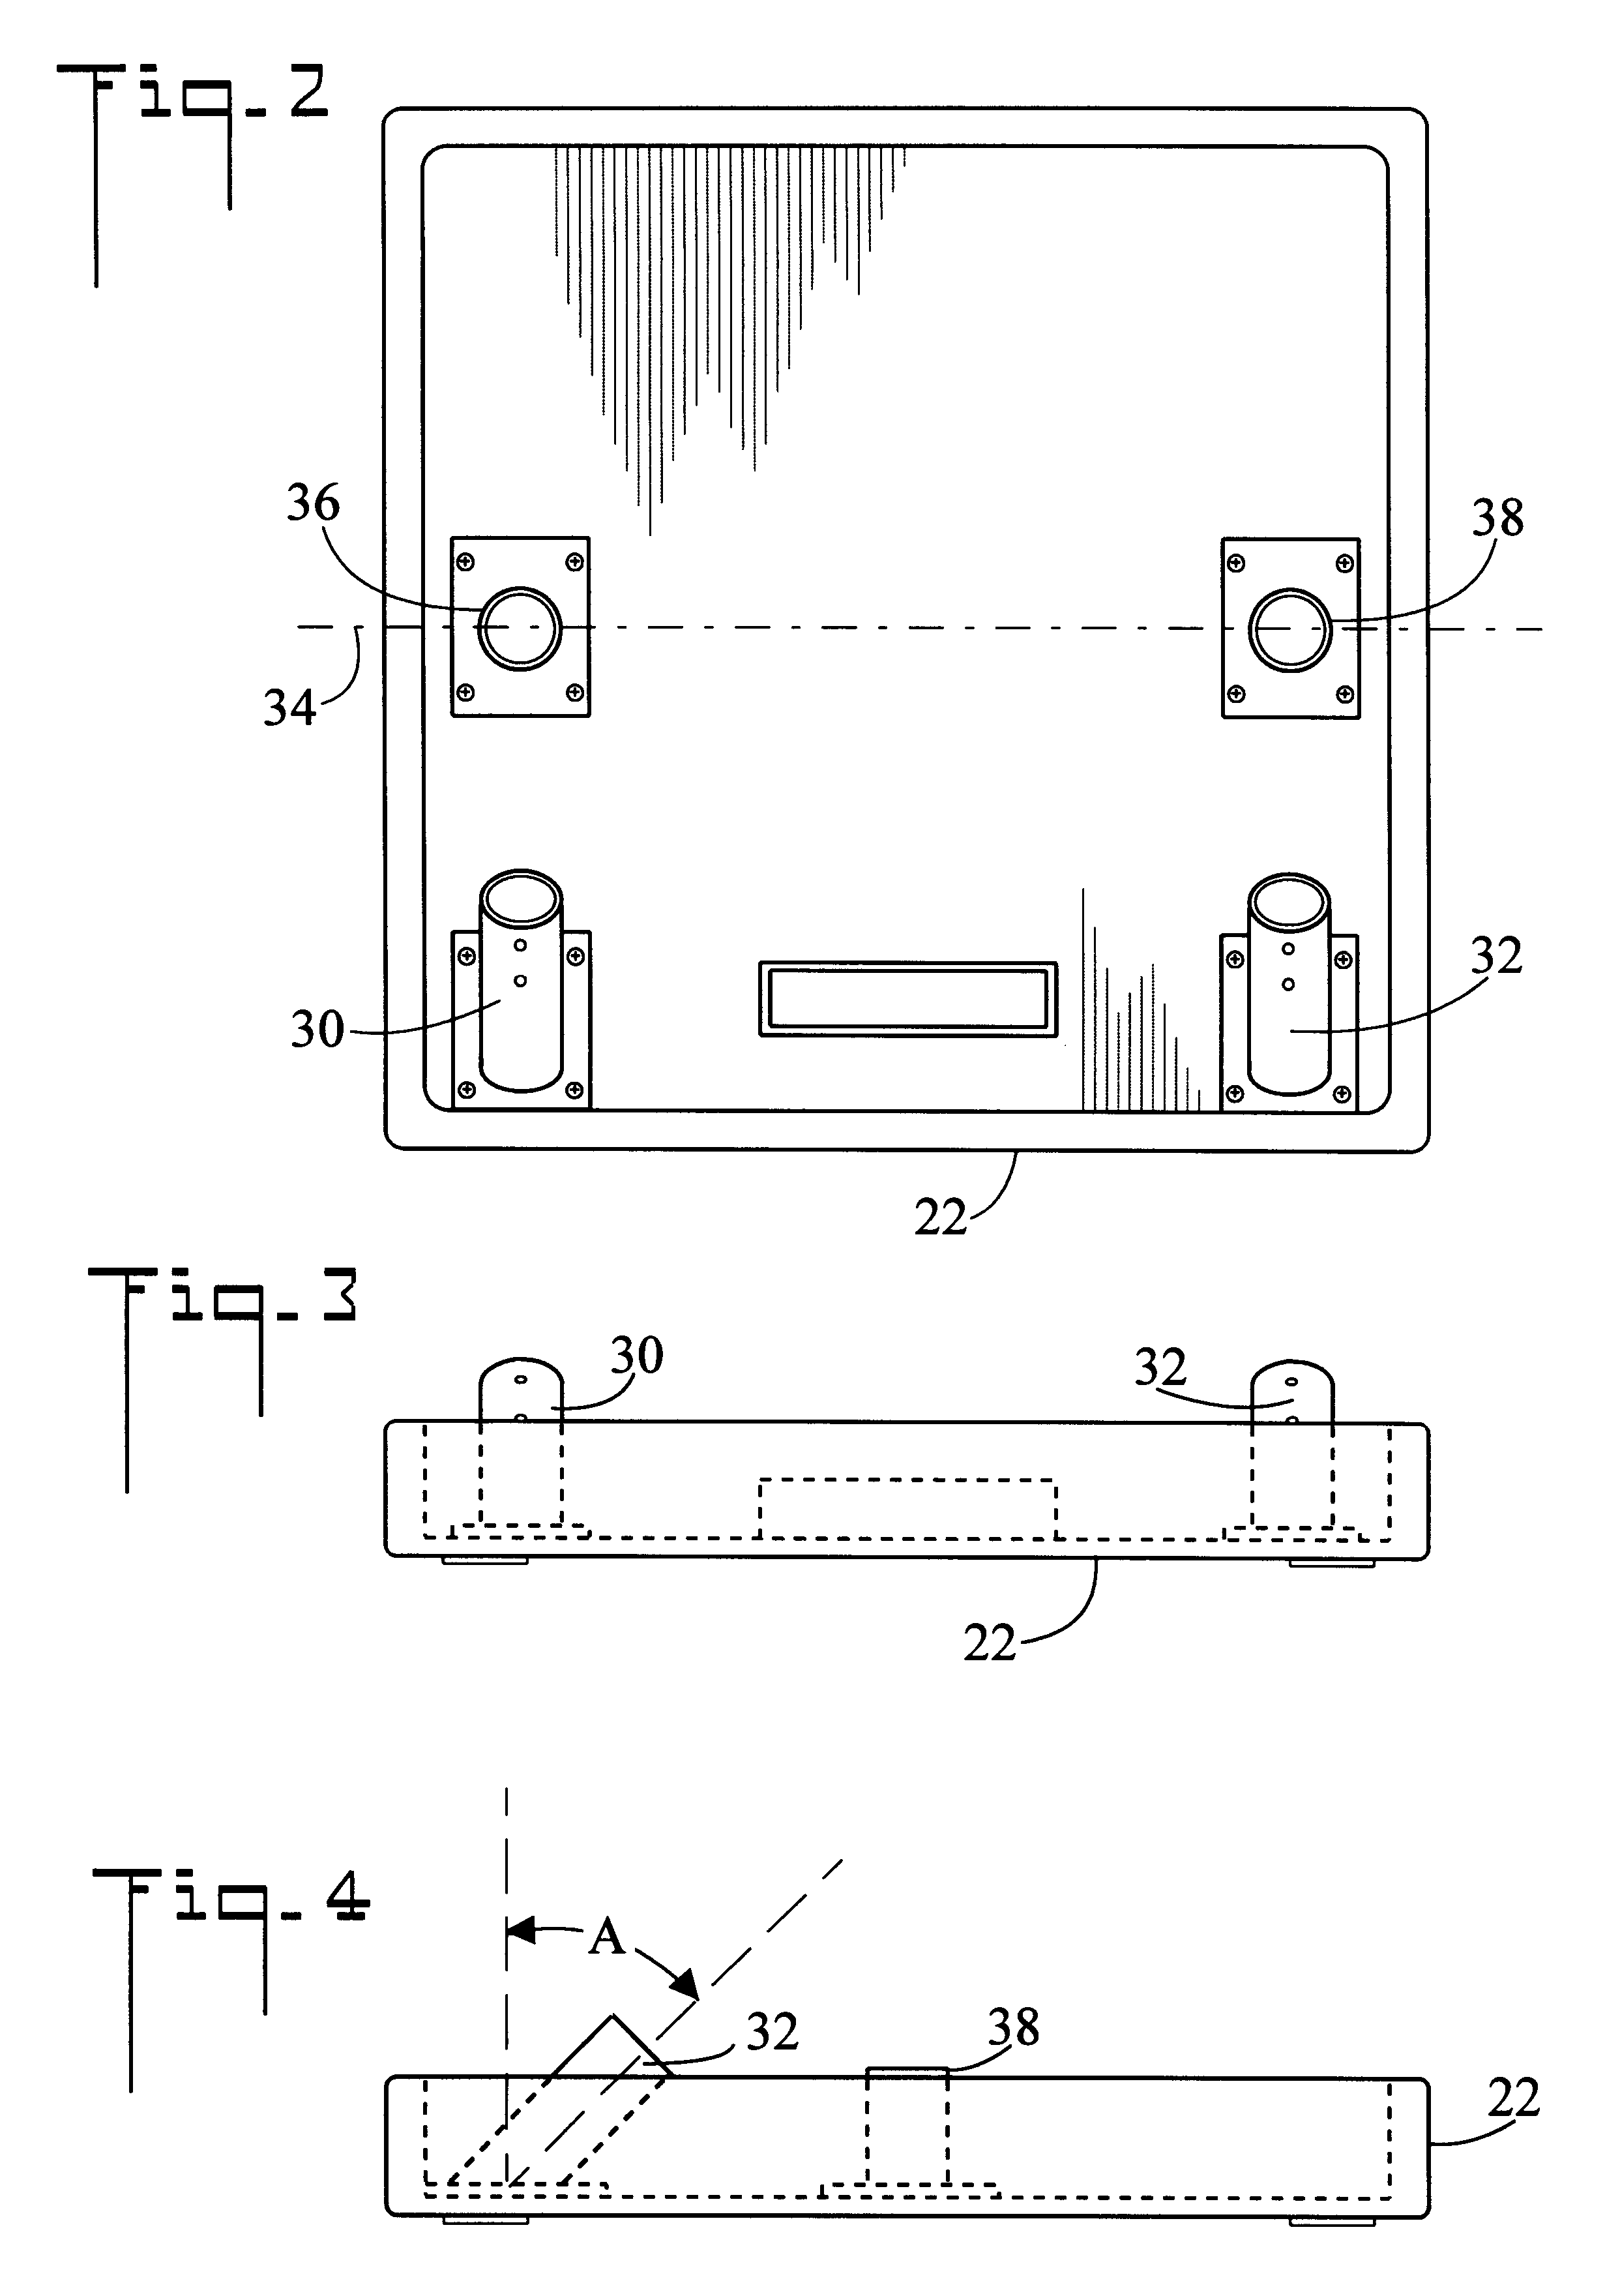 Apparatus for practicing knot tying and method of use